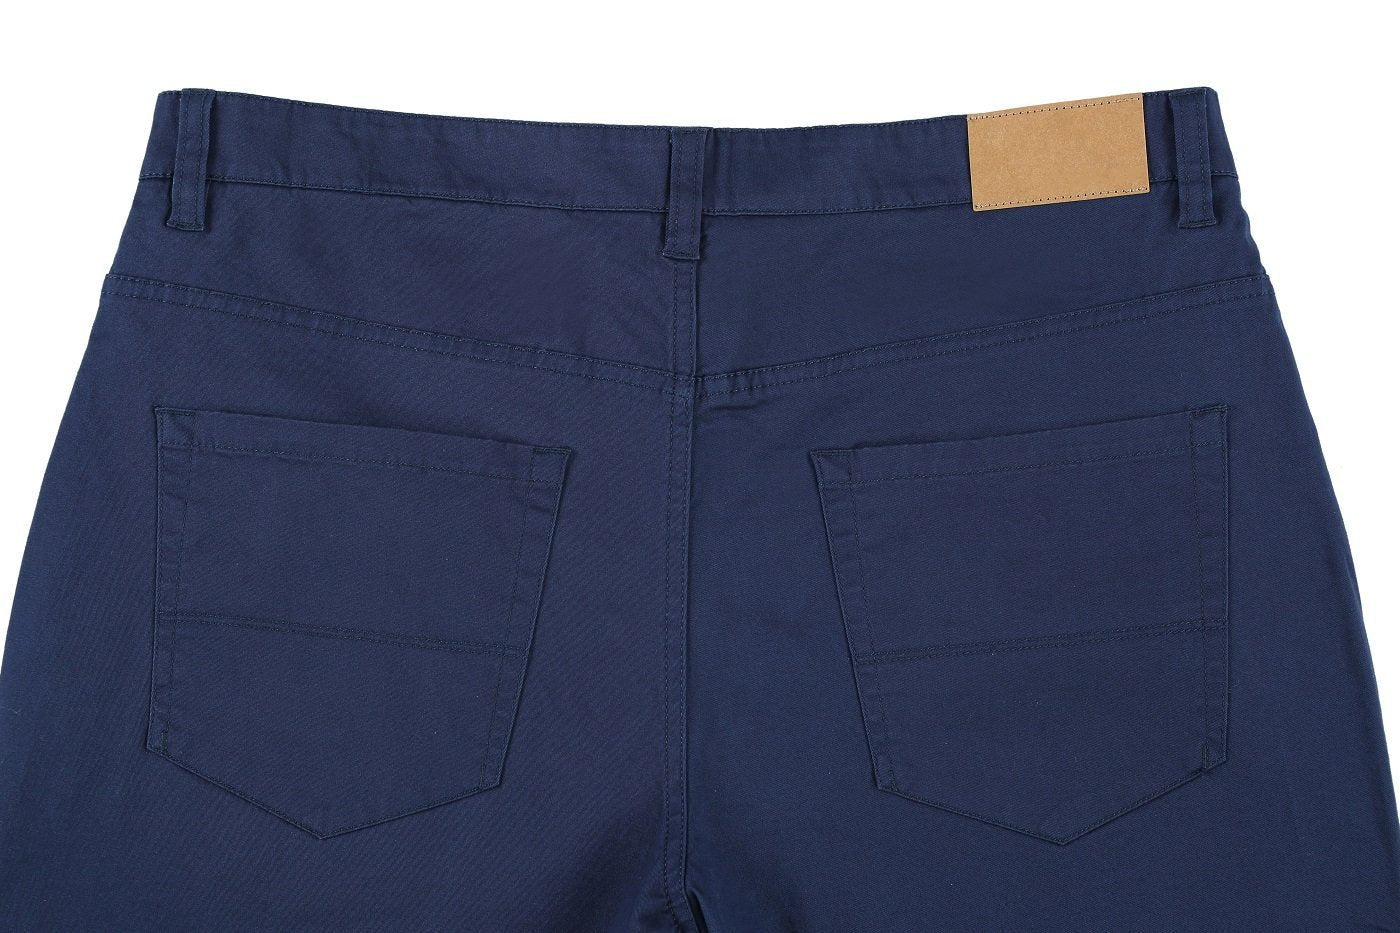 PF20-23 Men's 5-Pocket Blue Cotton Stretch Washed Flat Front Chino Pants